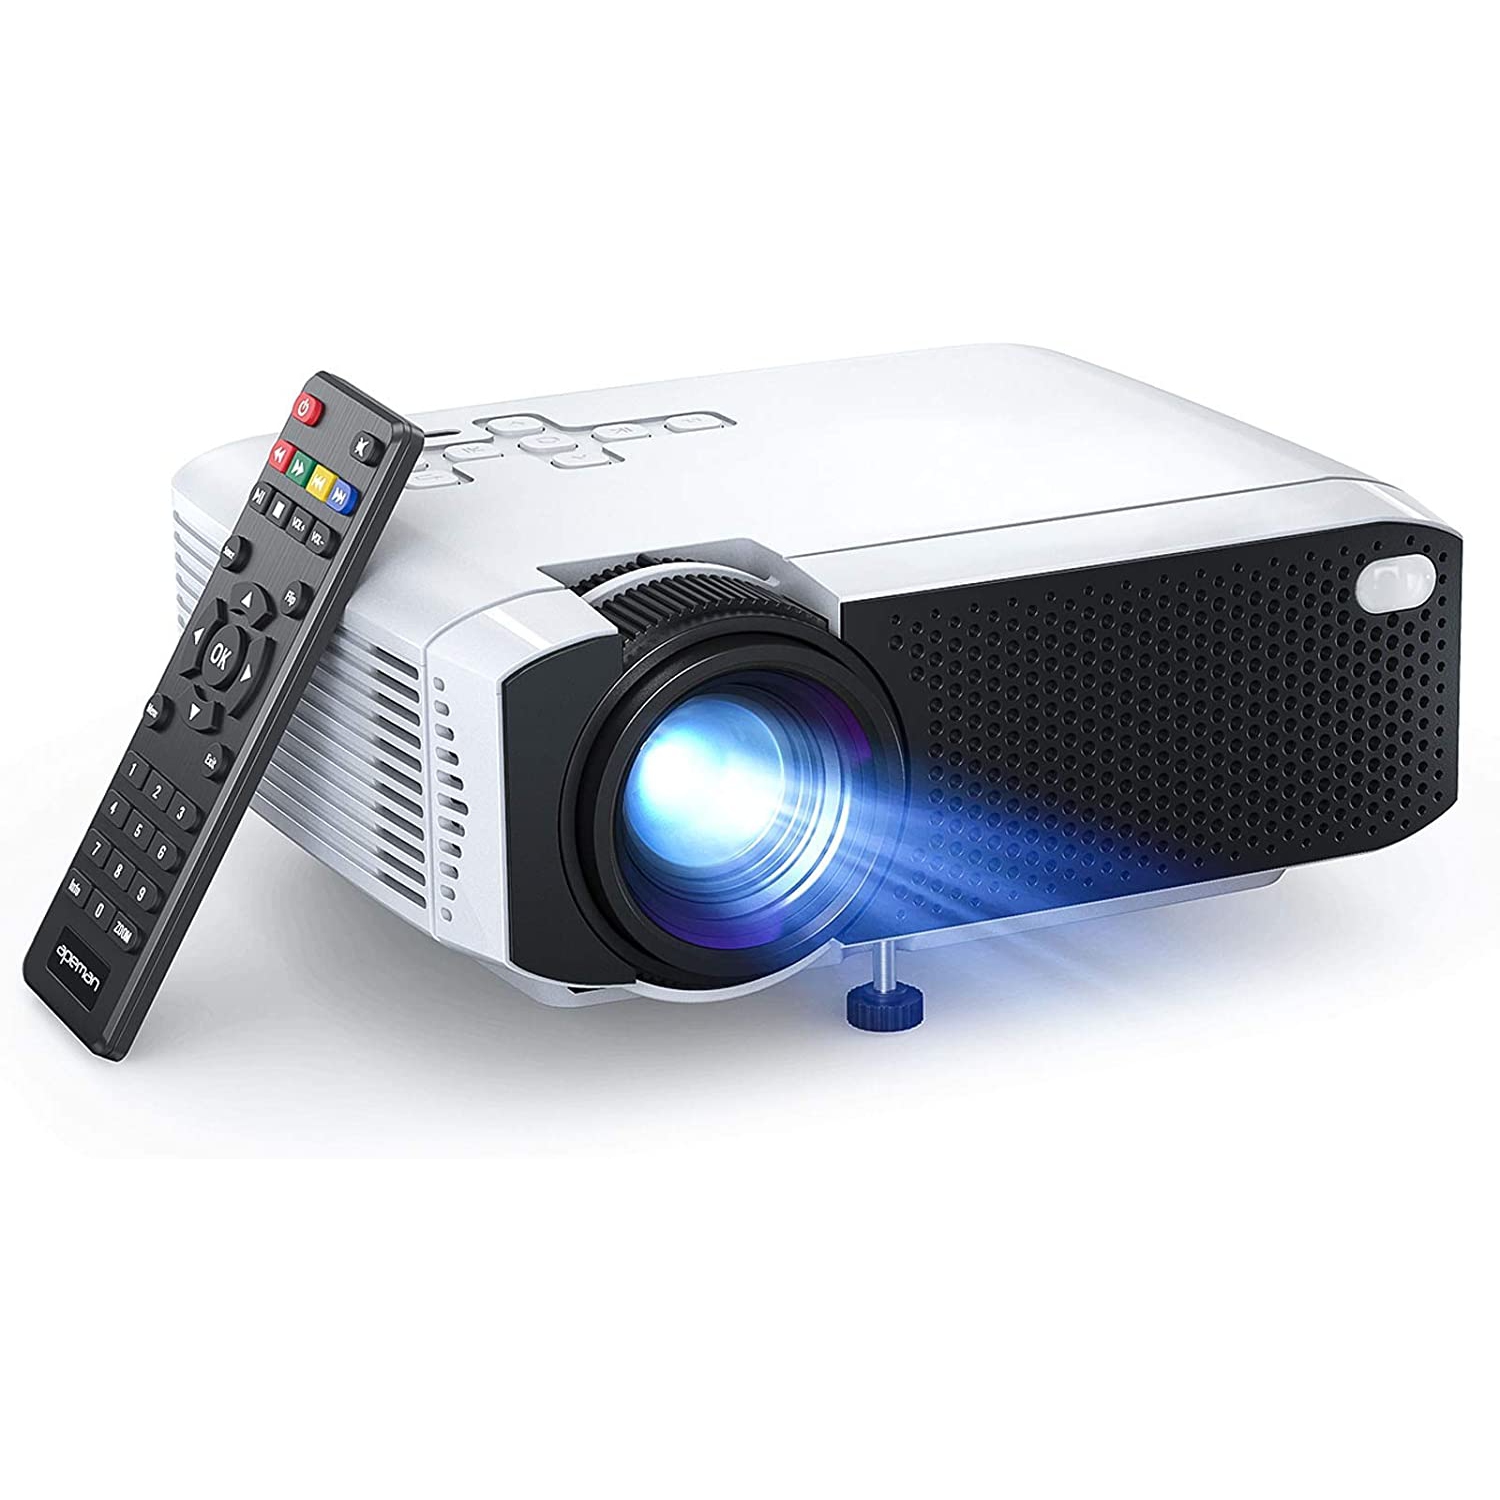 APEMAN Mini Portable LED 4000 Lumen Video Projector with Dual Built-in Speakers - Open box